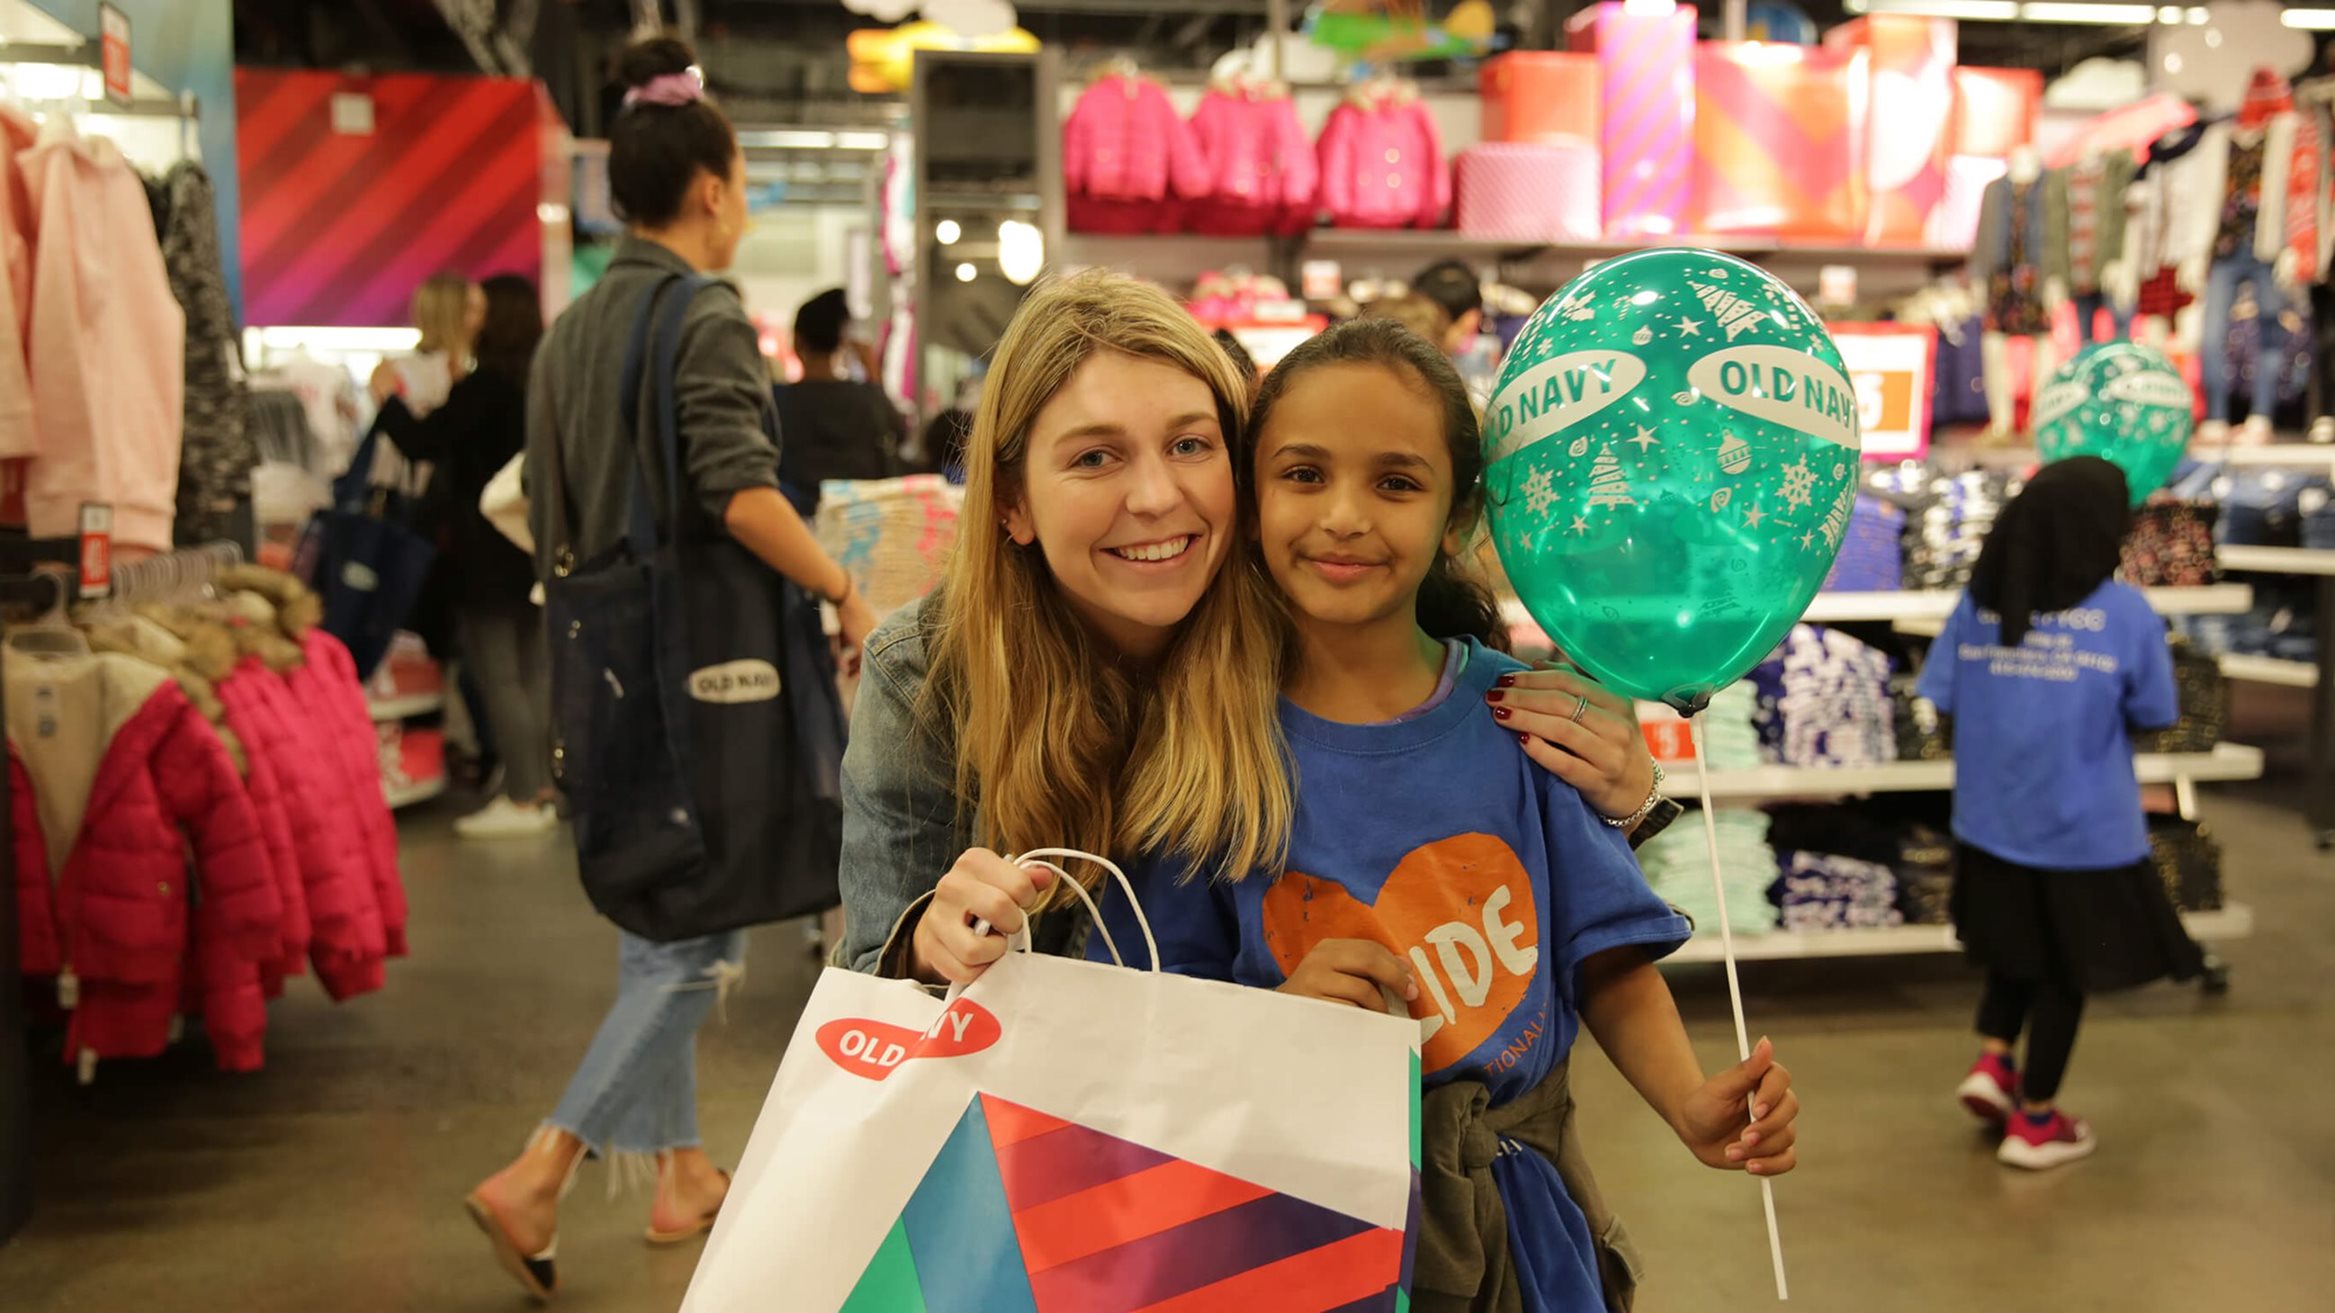 Old Navy Spreading the Old Navy Love for Deserving Kids